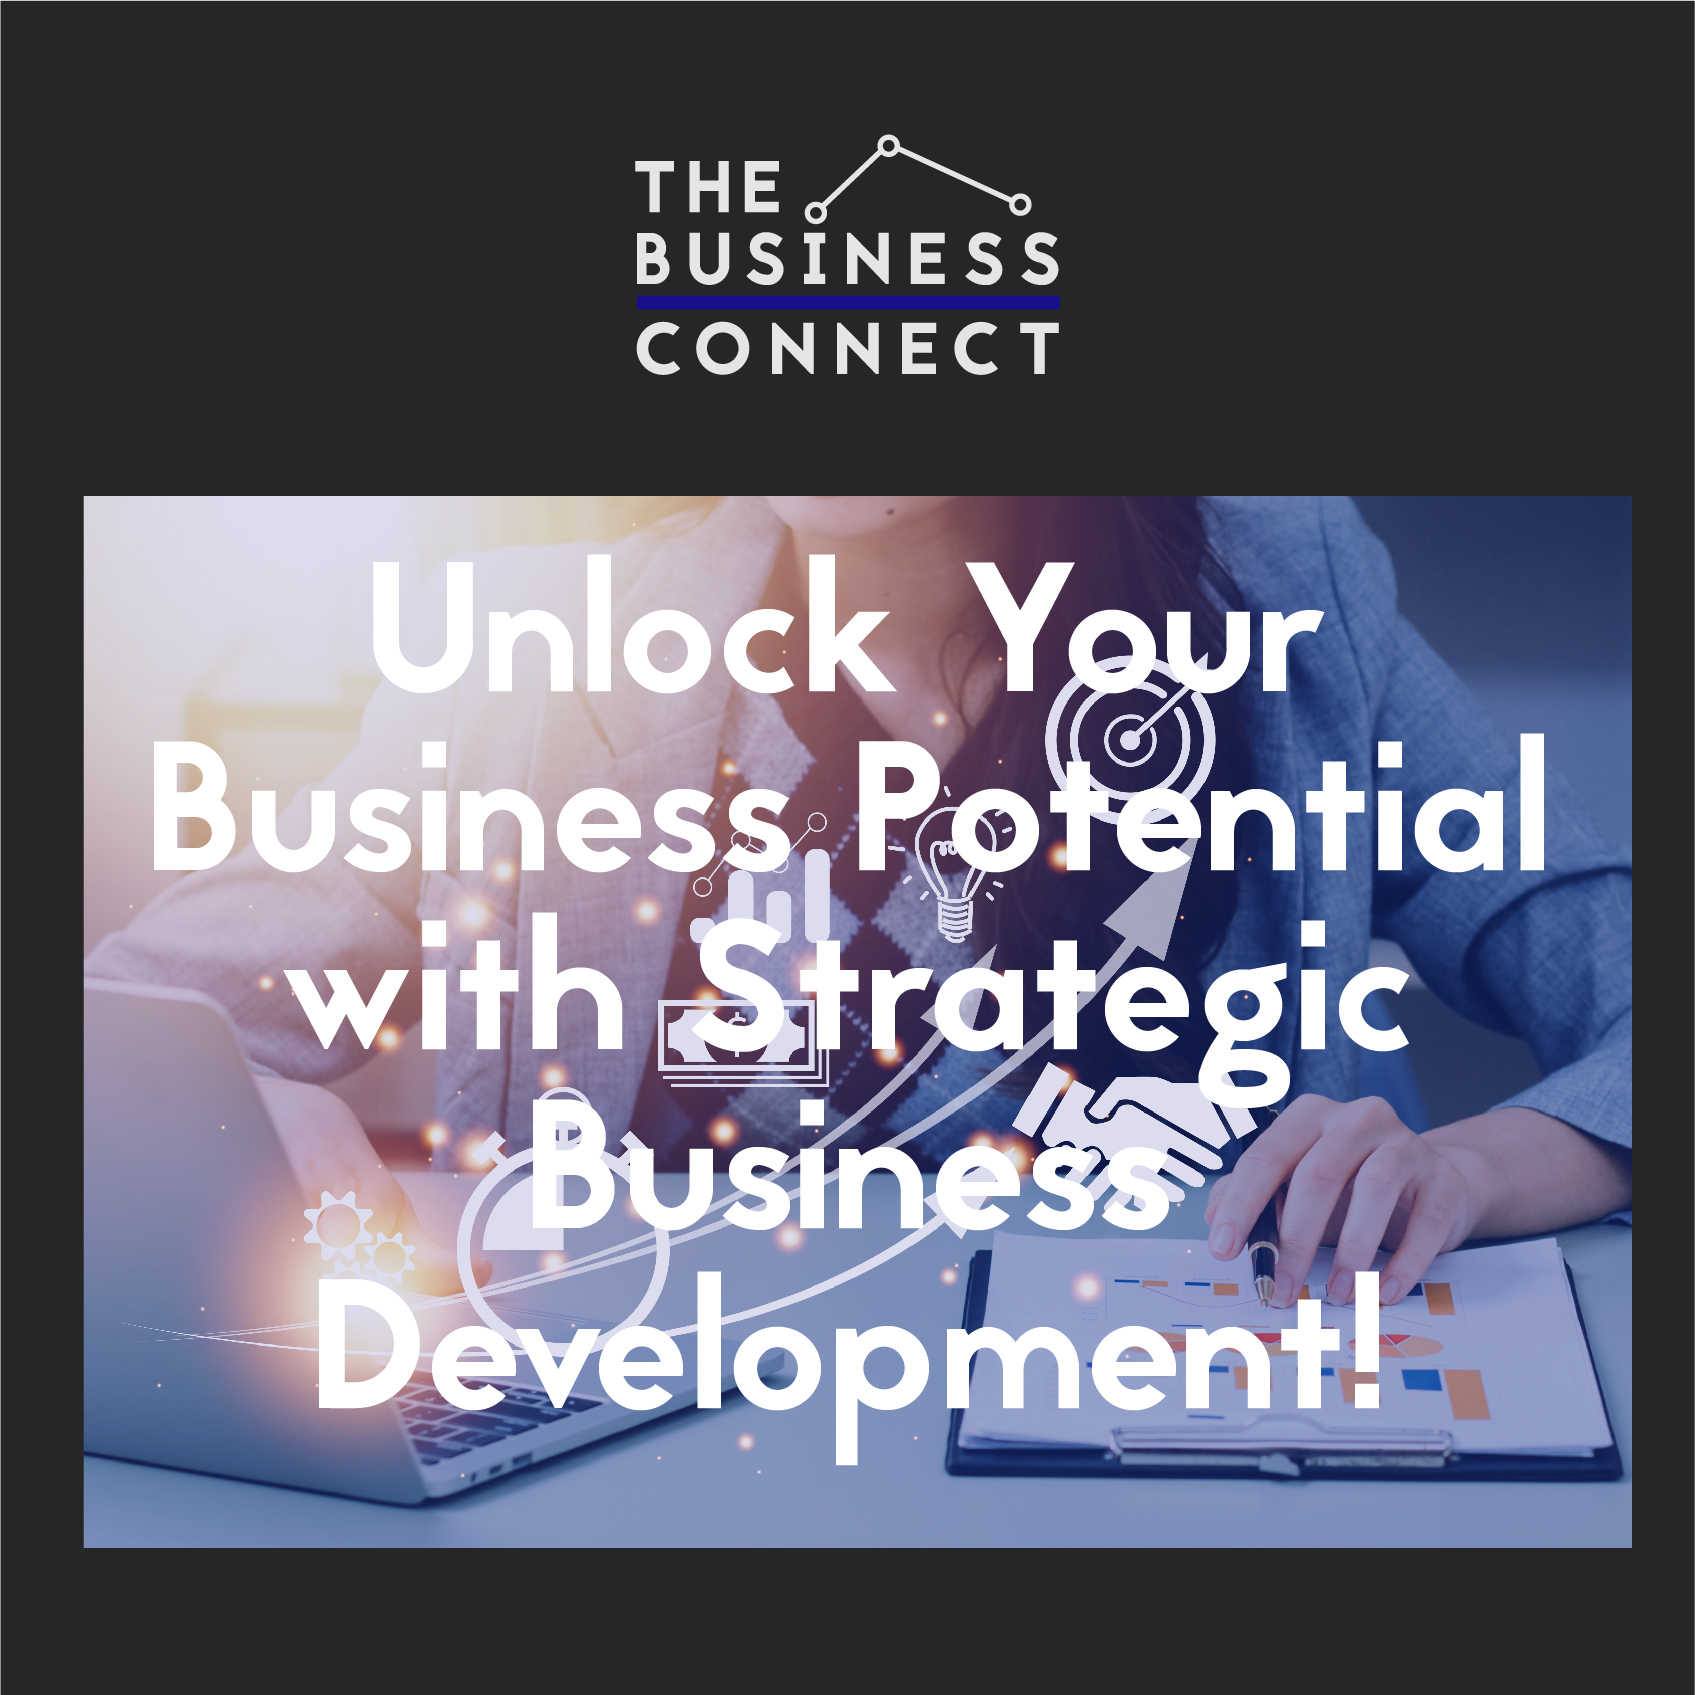 Unlock Your Business Potential with Strategic Business Development!